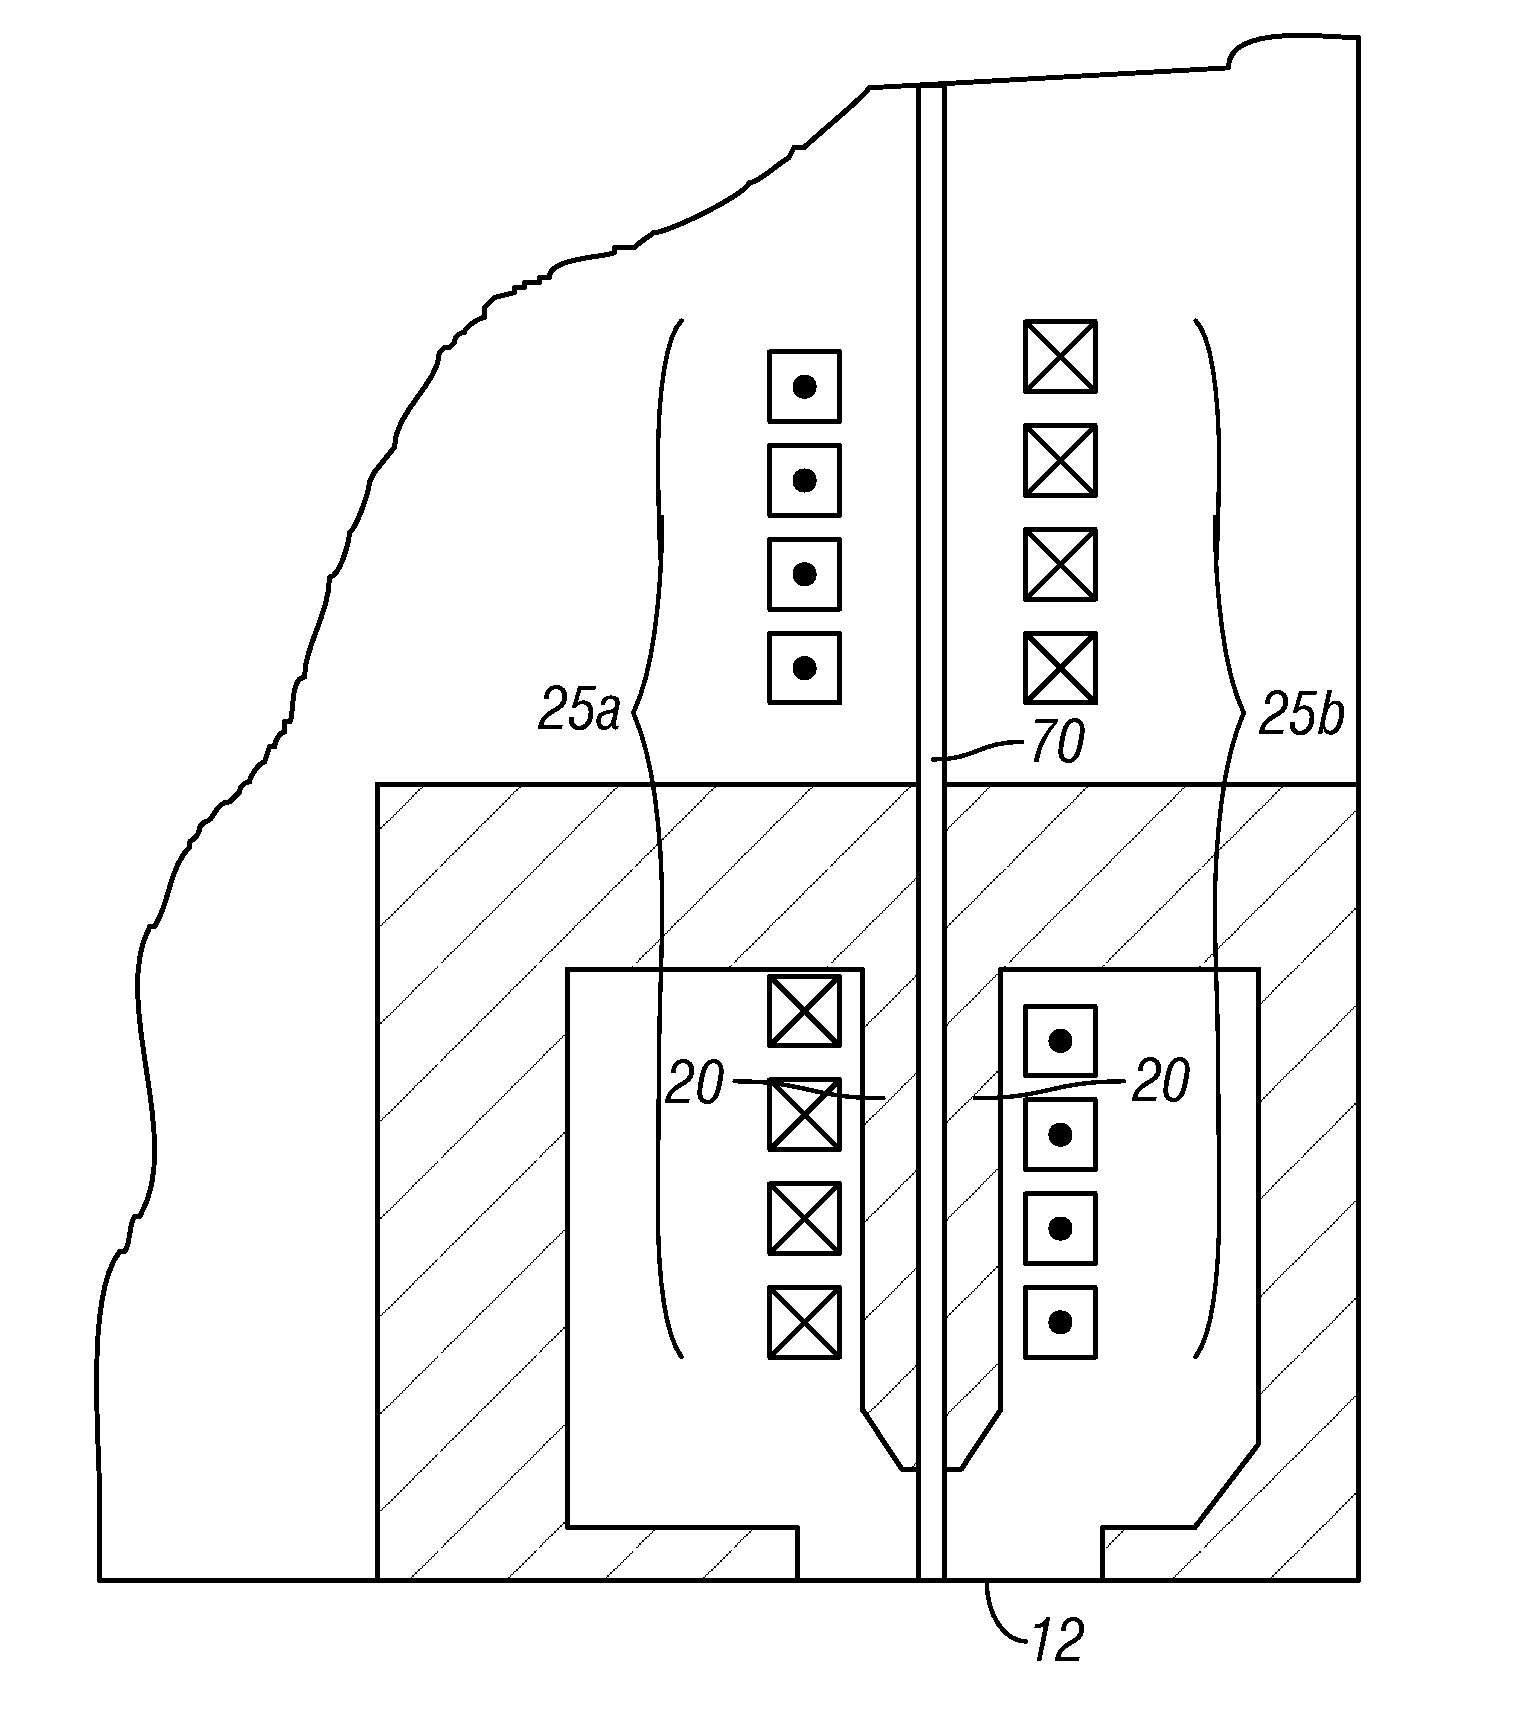 Thermally-assisted perpendicular magnetic recording system with write pole surrounding an optical channel and having recessed pole tip